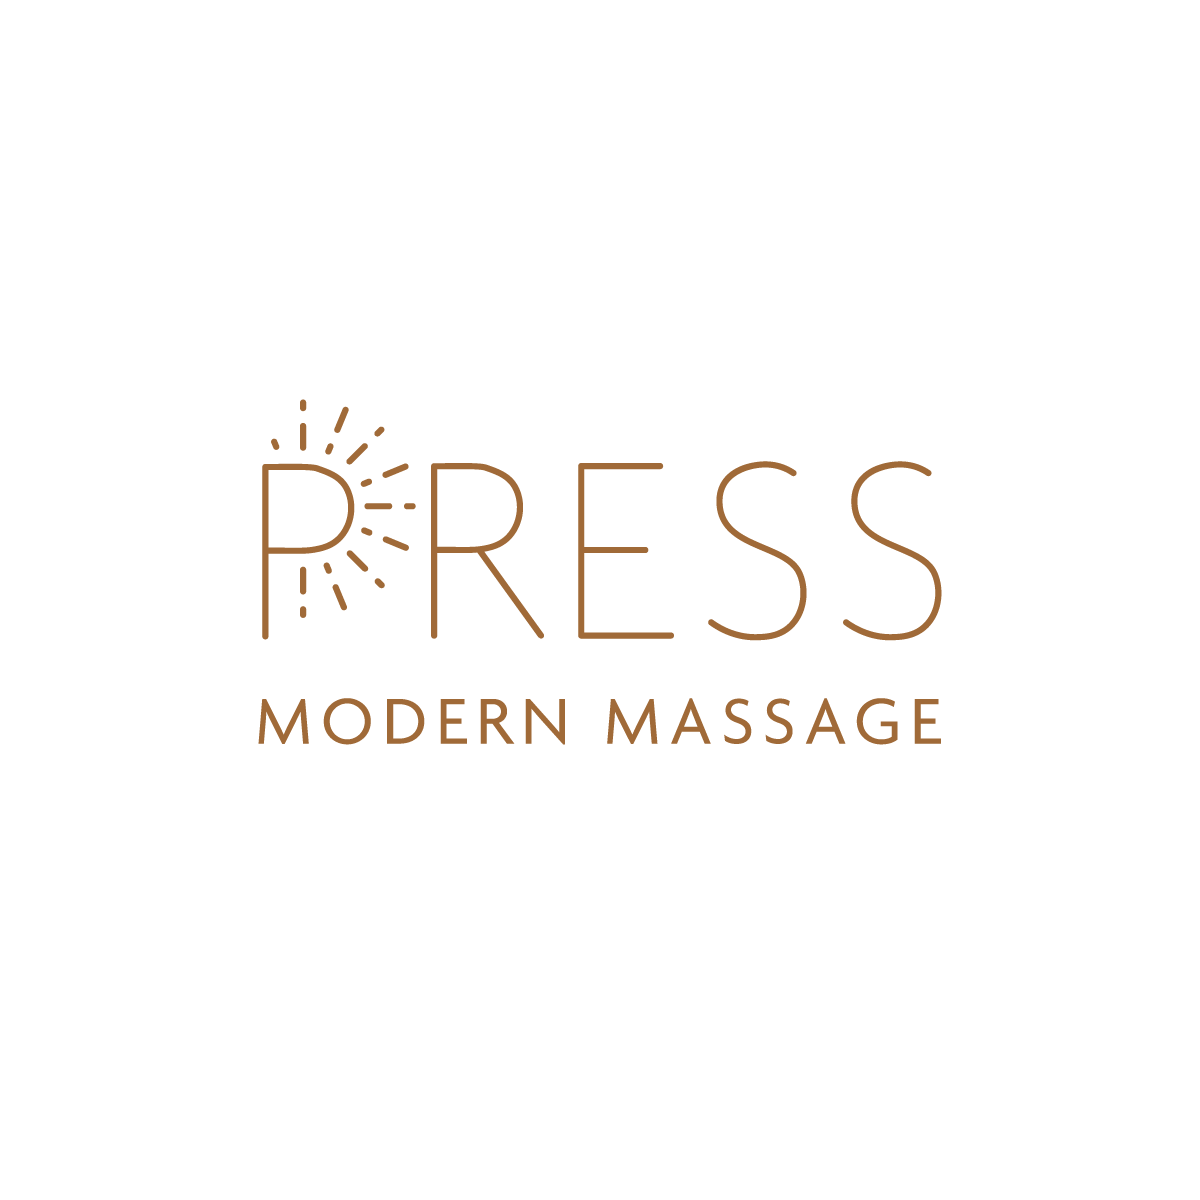 We Are Here For The Fashion Revolution! — PRESS Massage Greenpoint